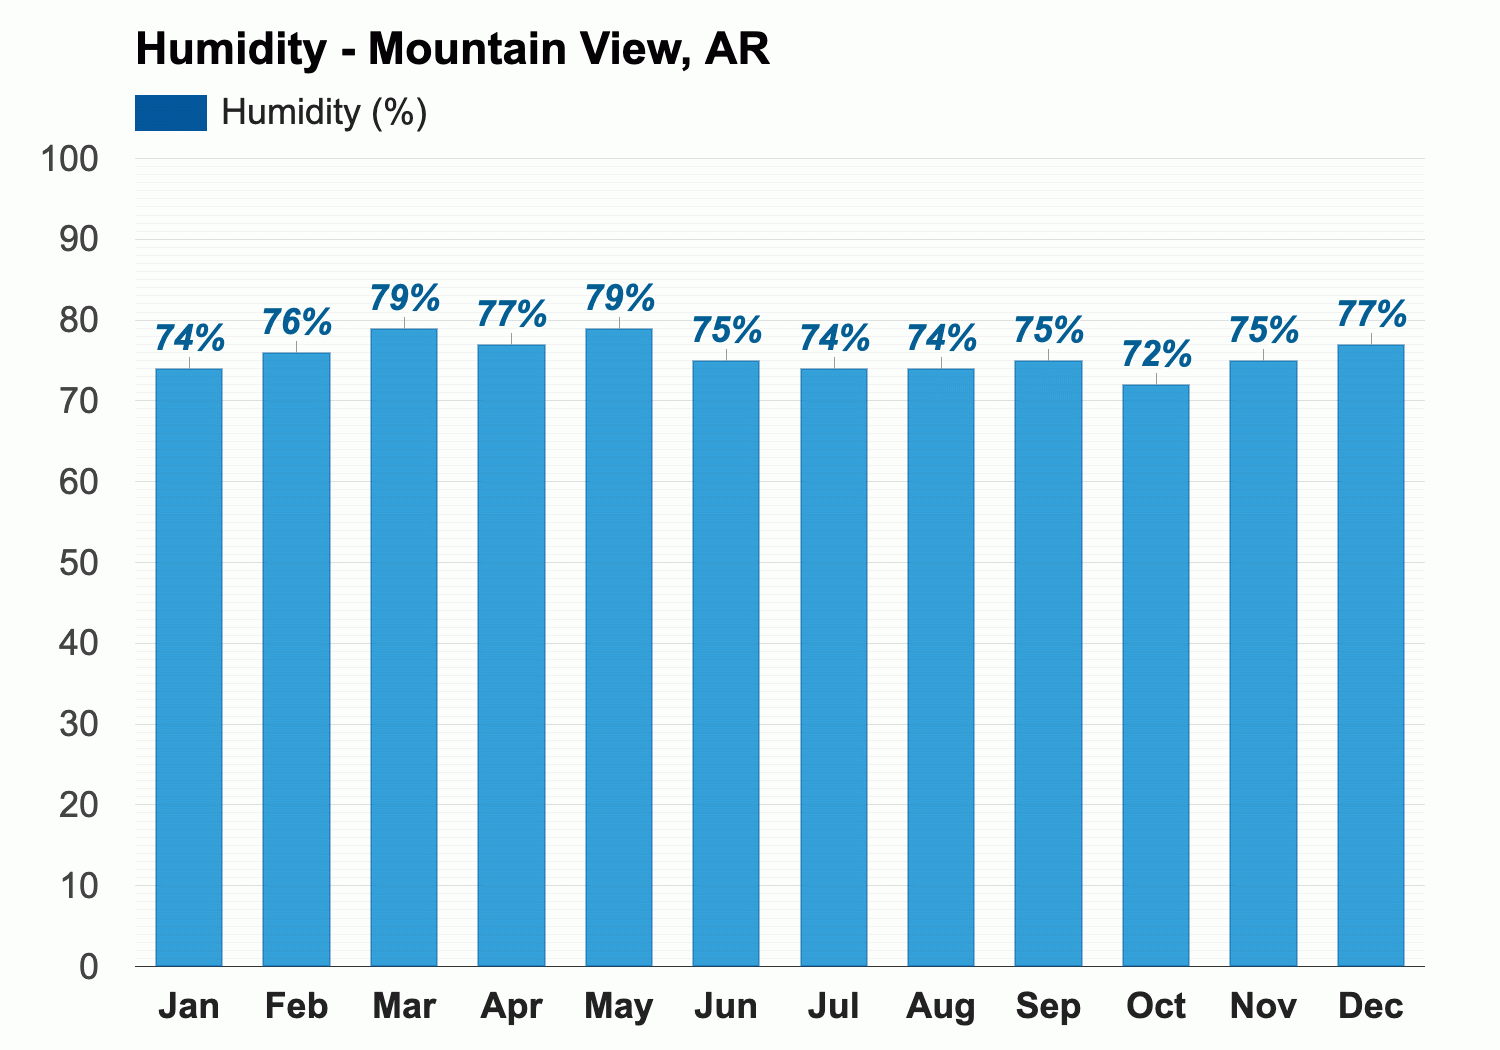 Mountain View, AR   December weather forecast and climate ...